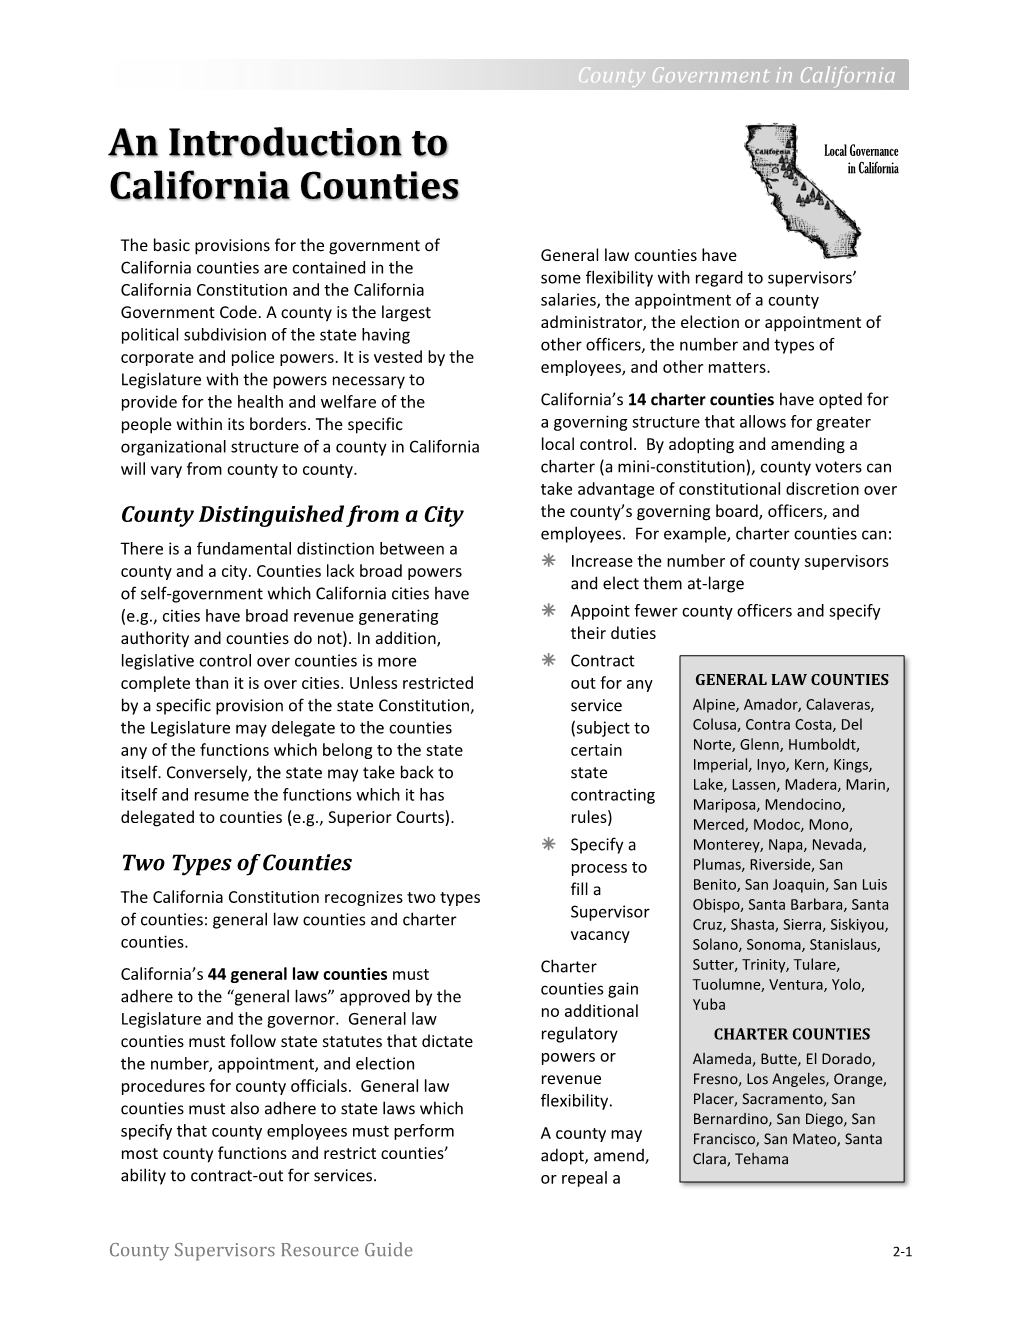 An Introduction to California Counties